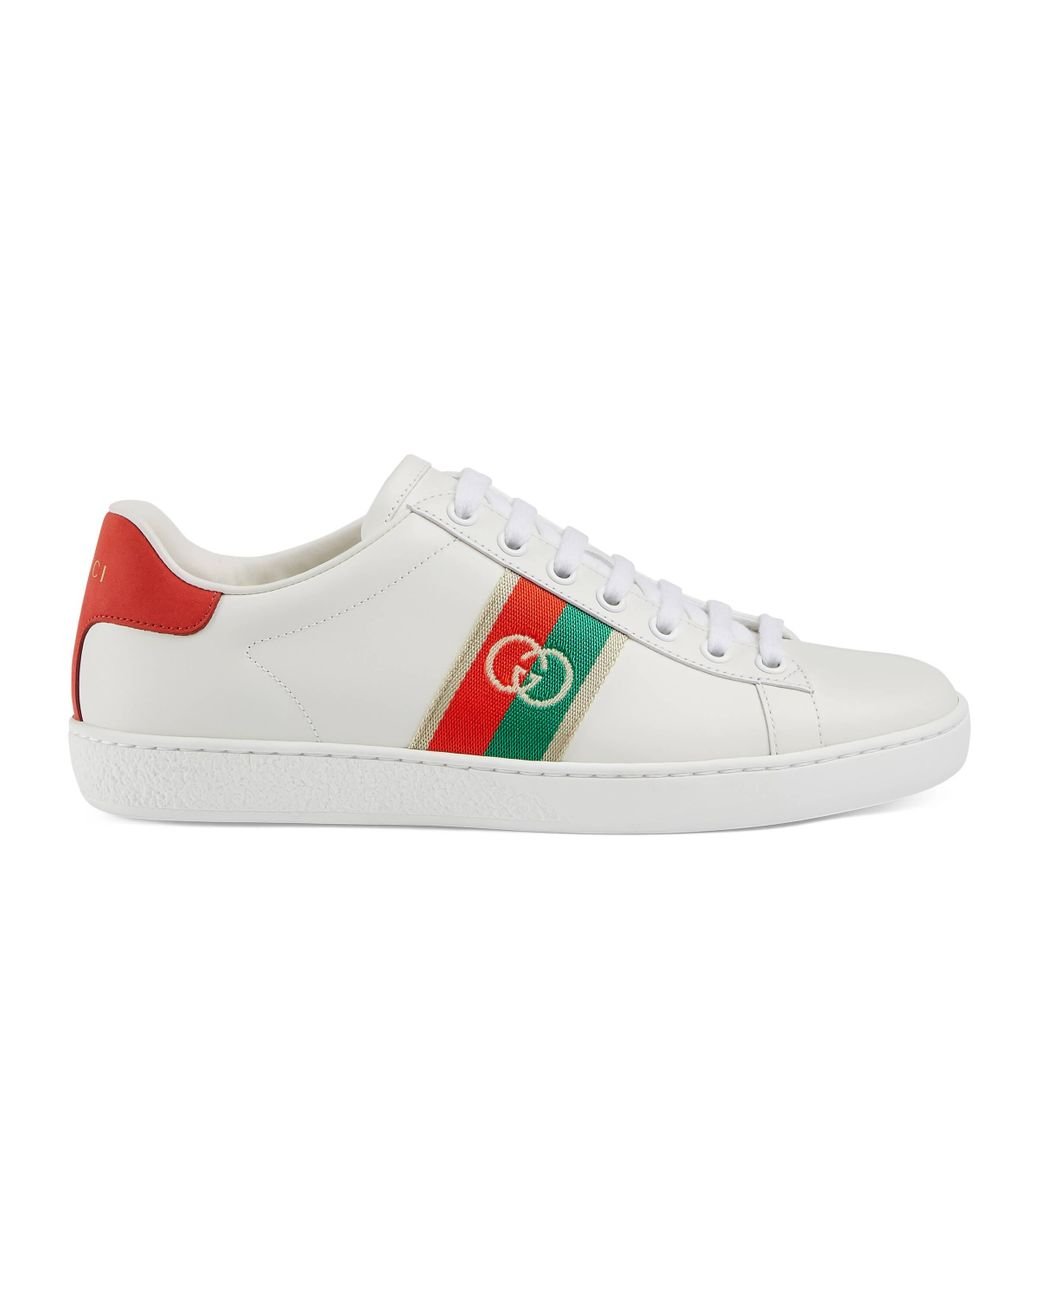 Gucci Leather Ace Sneaker With Interlocking G in White - Lyst